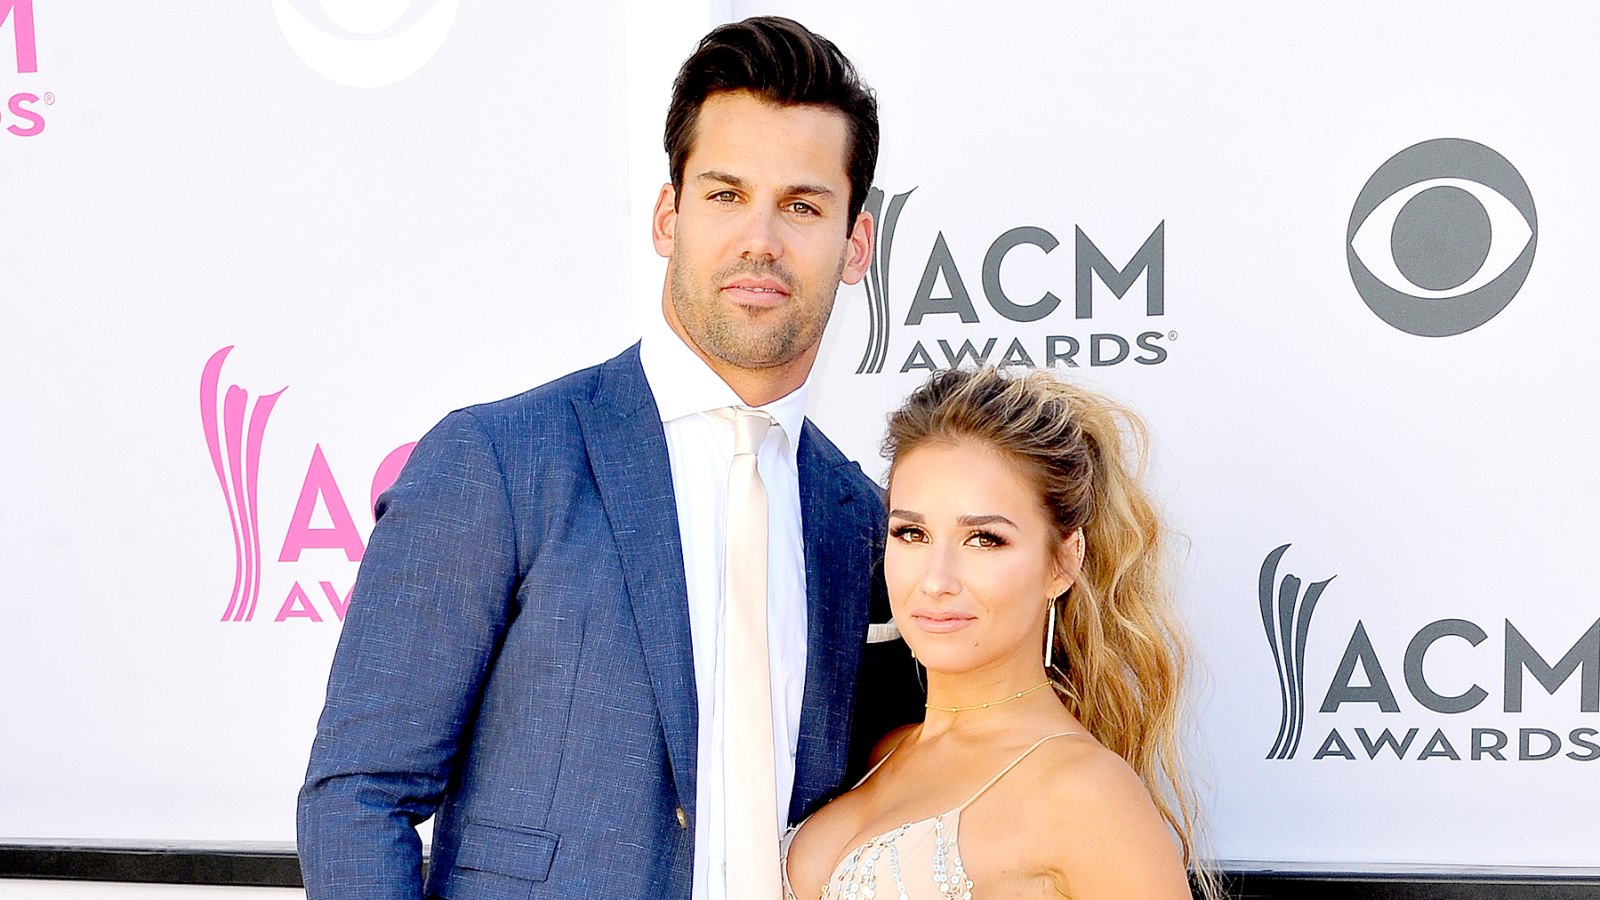 Eric Decker and Jessie James Decker arrive at the 52nd Academy Of Country Music Awards on April 2, 2017 in Las Vegas, Nevada.